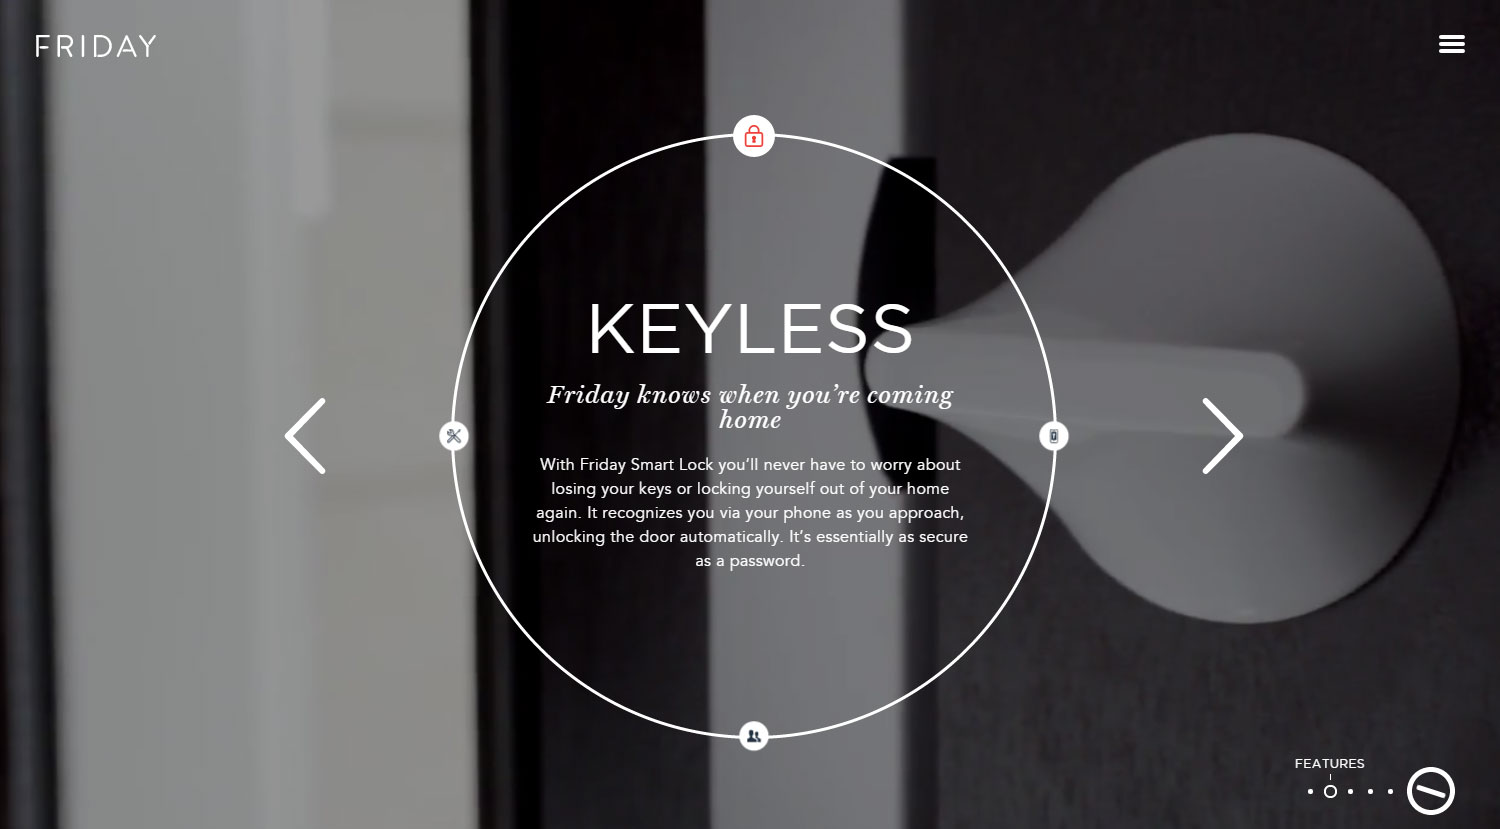 Friday Smart Lock - Website of the Day